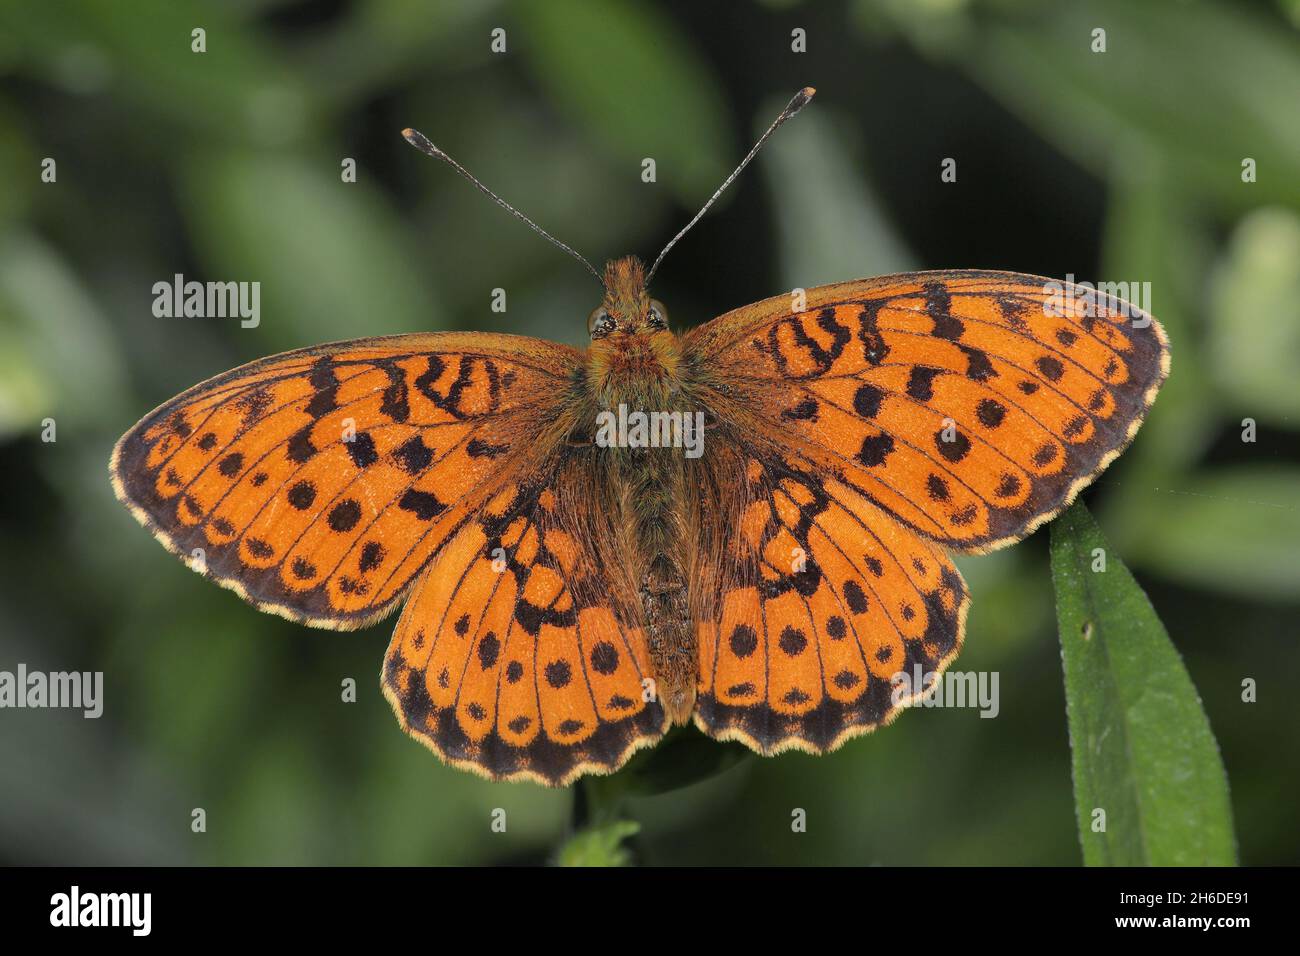 lesser marbled fritillary (Brenthis ino), sits on a leaf, Germany Stock Photo